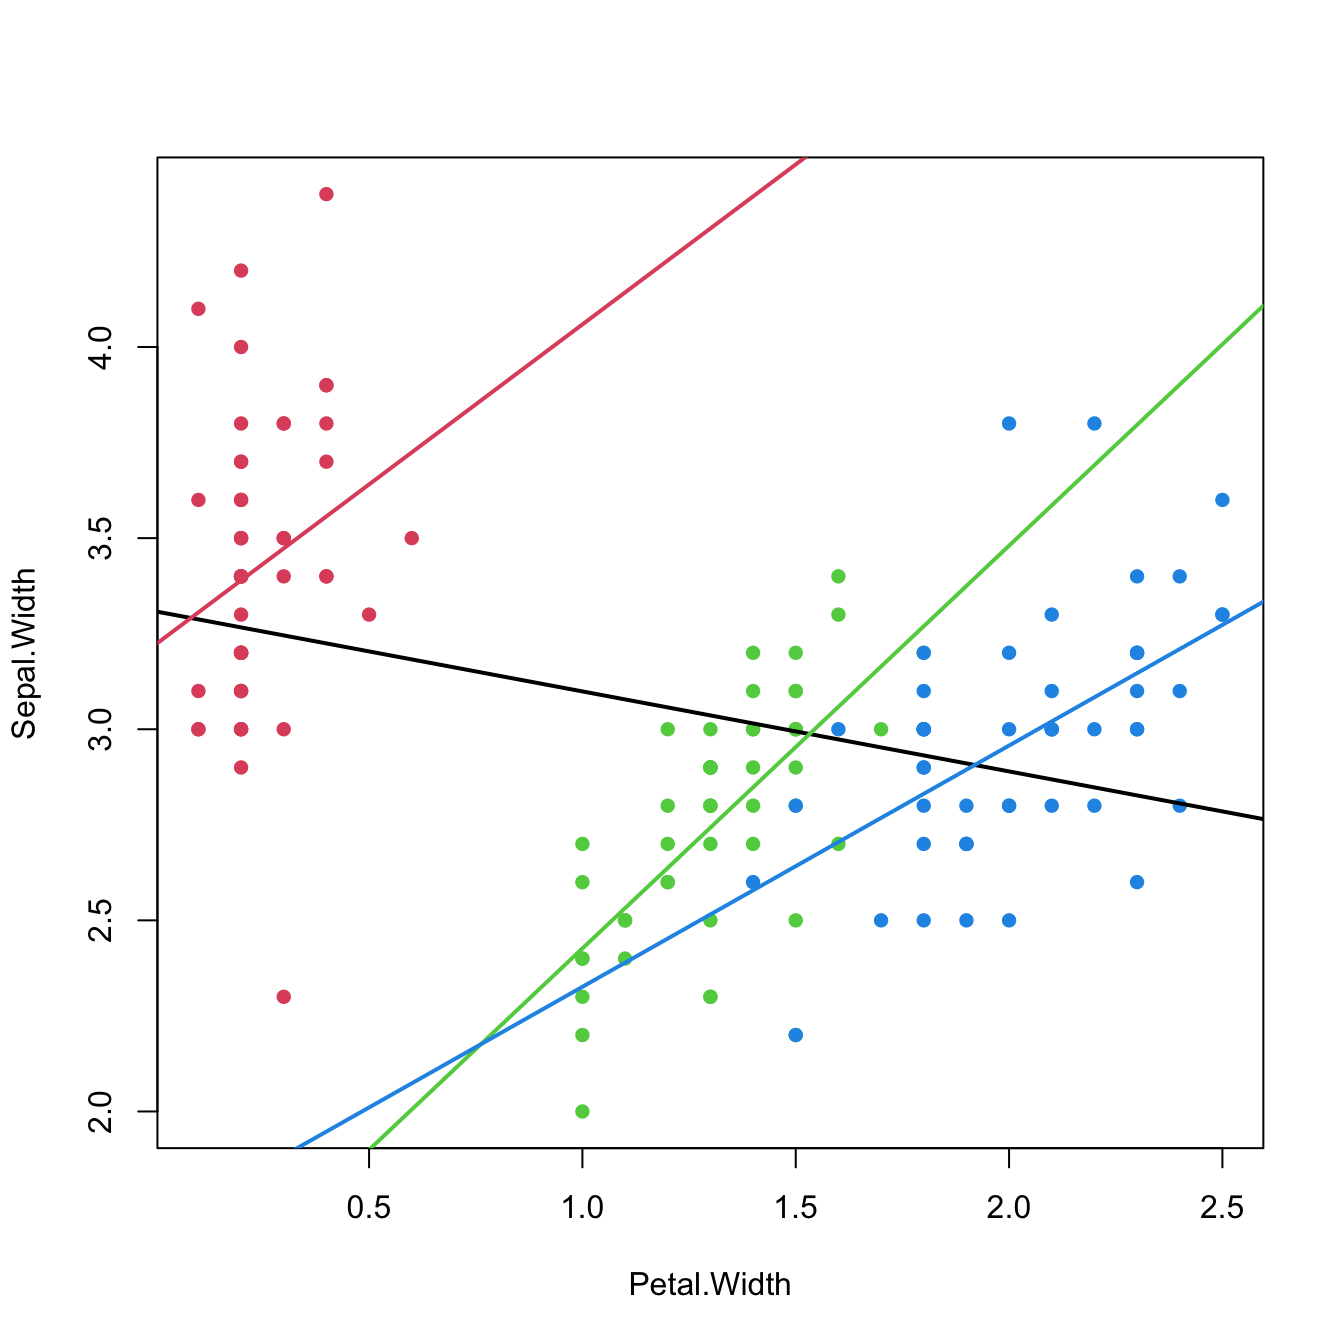 The three linear fits of Sepal.Width ~ Petal.Width * Species for each of the three levels in the Species factor (setosa in red, versicolor in green, and virginica in blue) in the iris dataset. The black line represents the linear fit for Sepal.Width ~ Petal.Width, that is, the linear fit without accounting for the levels in Species. Recall how Sepal.Widthis positively correlated with Petal.Width within each group, but is negatively correlated in the aggregated data.